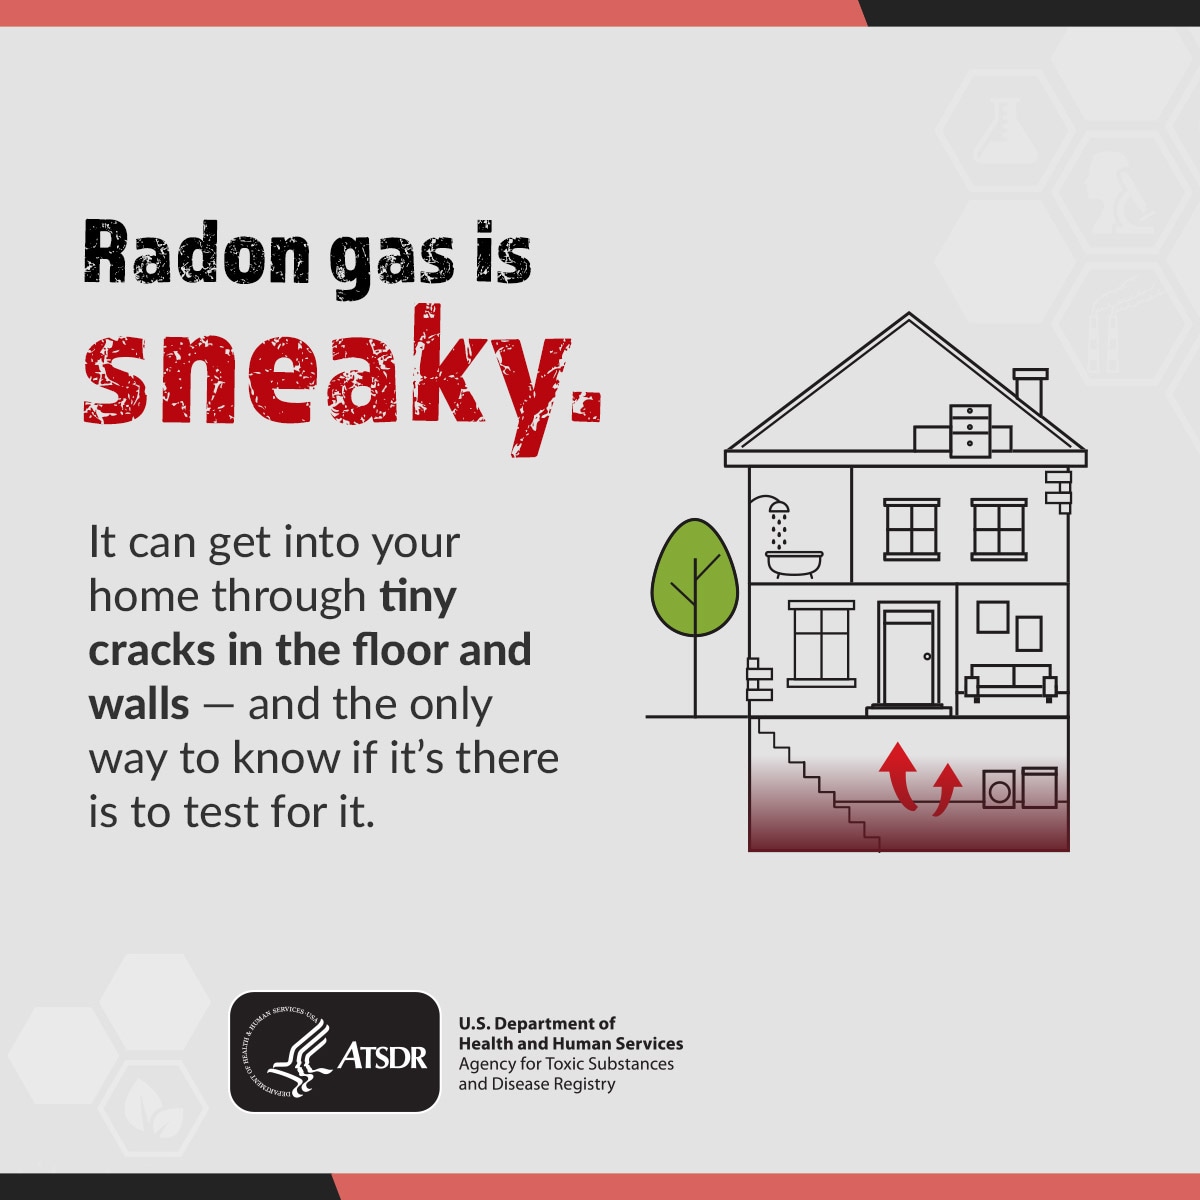 Radon gas is sneaky. It can get into your home through tiny cracks in the floor and walls; and the only way to know if it's there is to test for it.